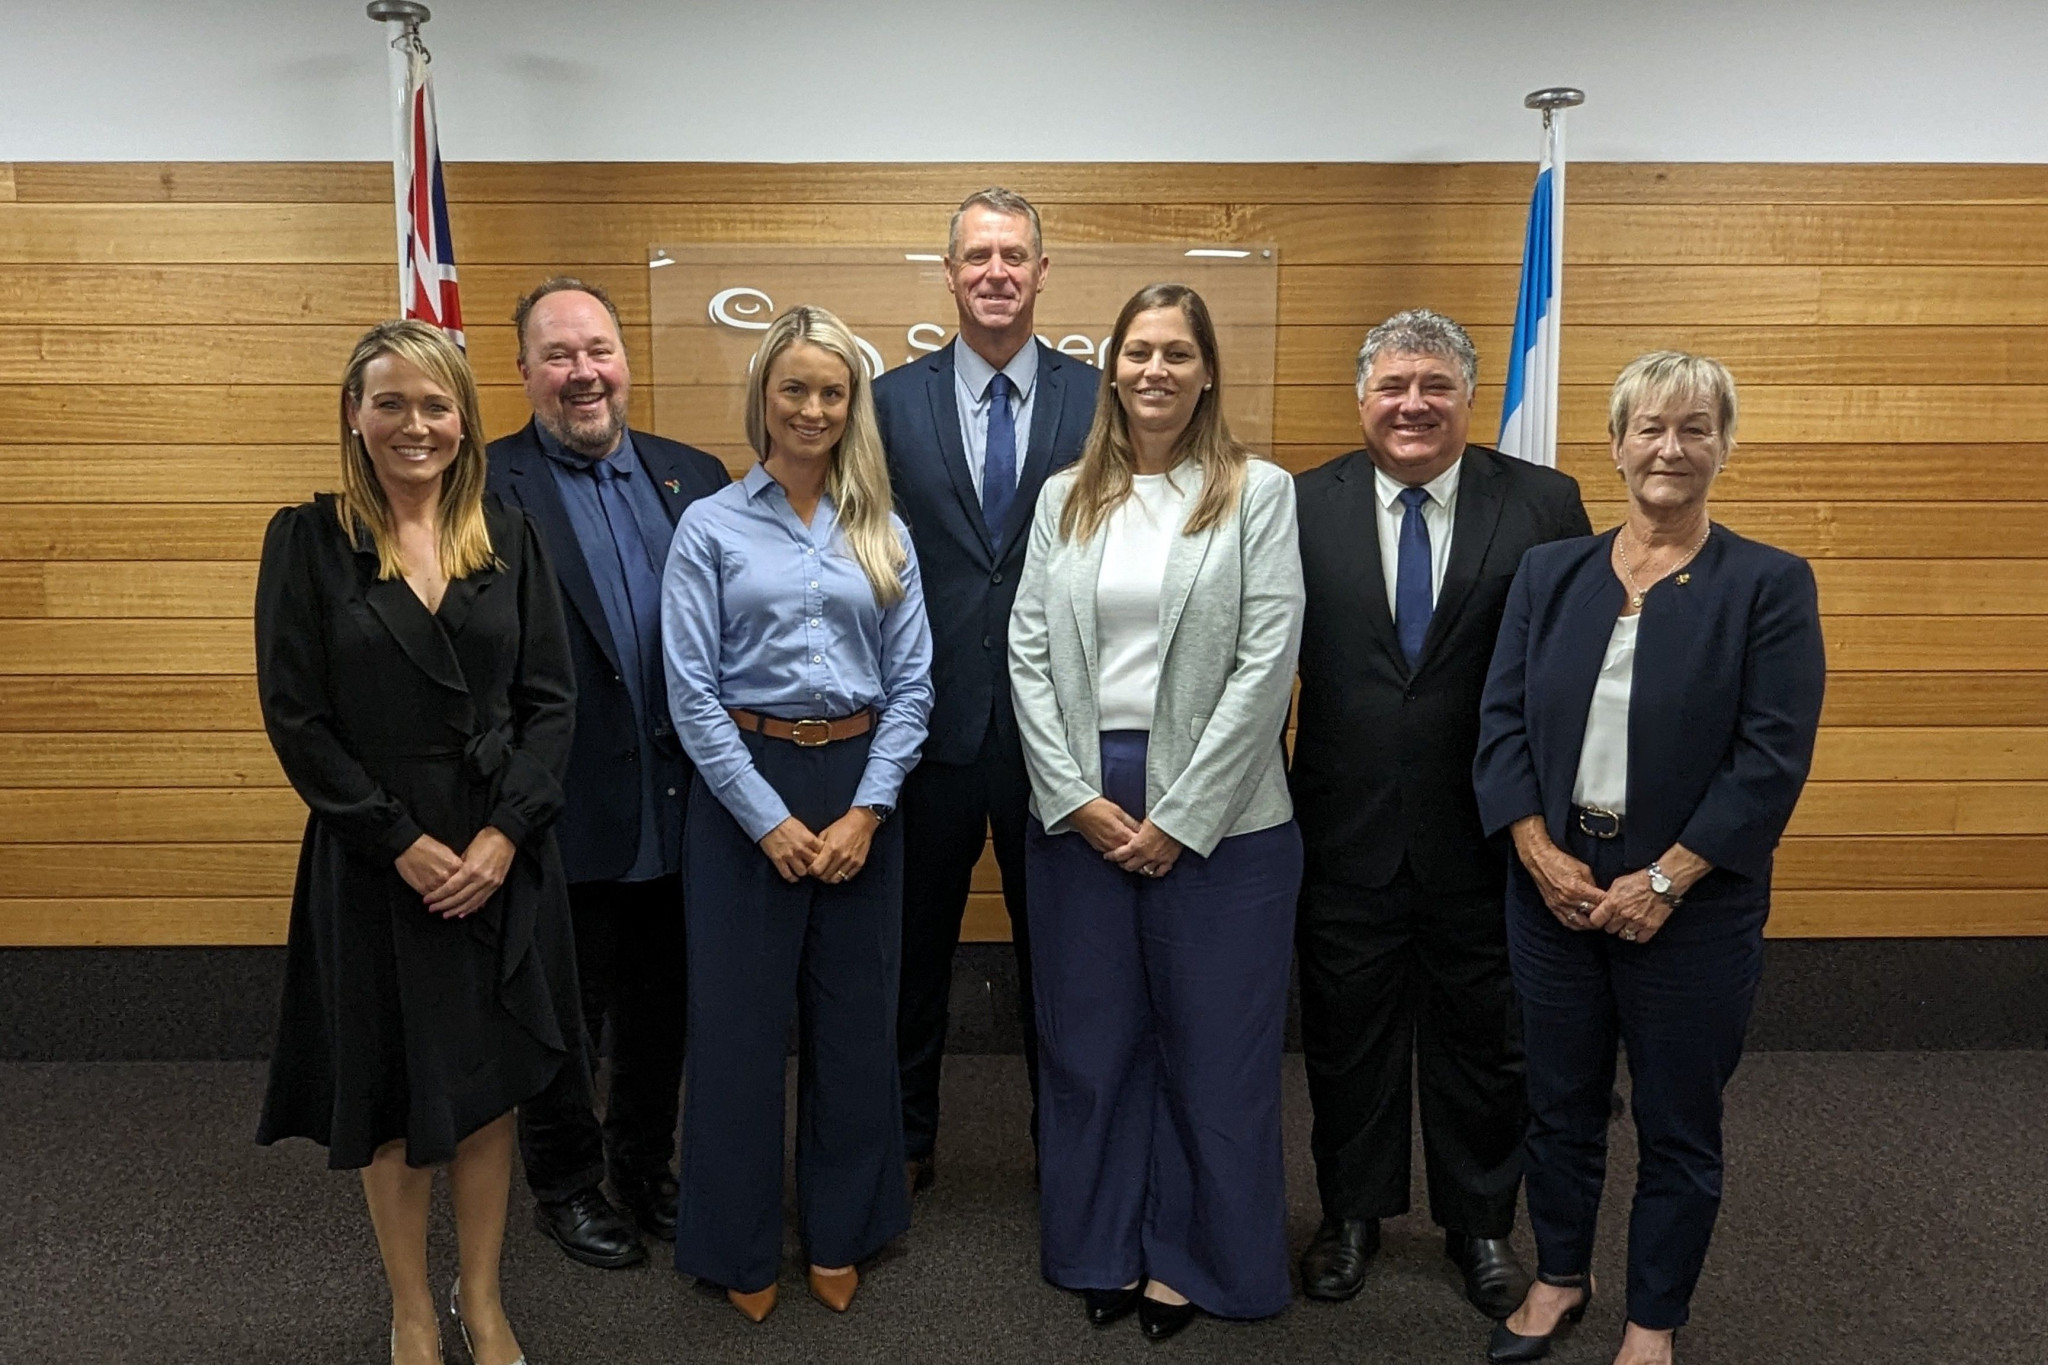 The new Somerset Council: Mayor Jason Wendt (middle); Councillors (left to right): Kylee Isidro, Michael Bishop, Michael Bishop, Tiara Hurley, Sally Jess, Brett Freese, Helen Brieschke.